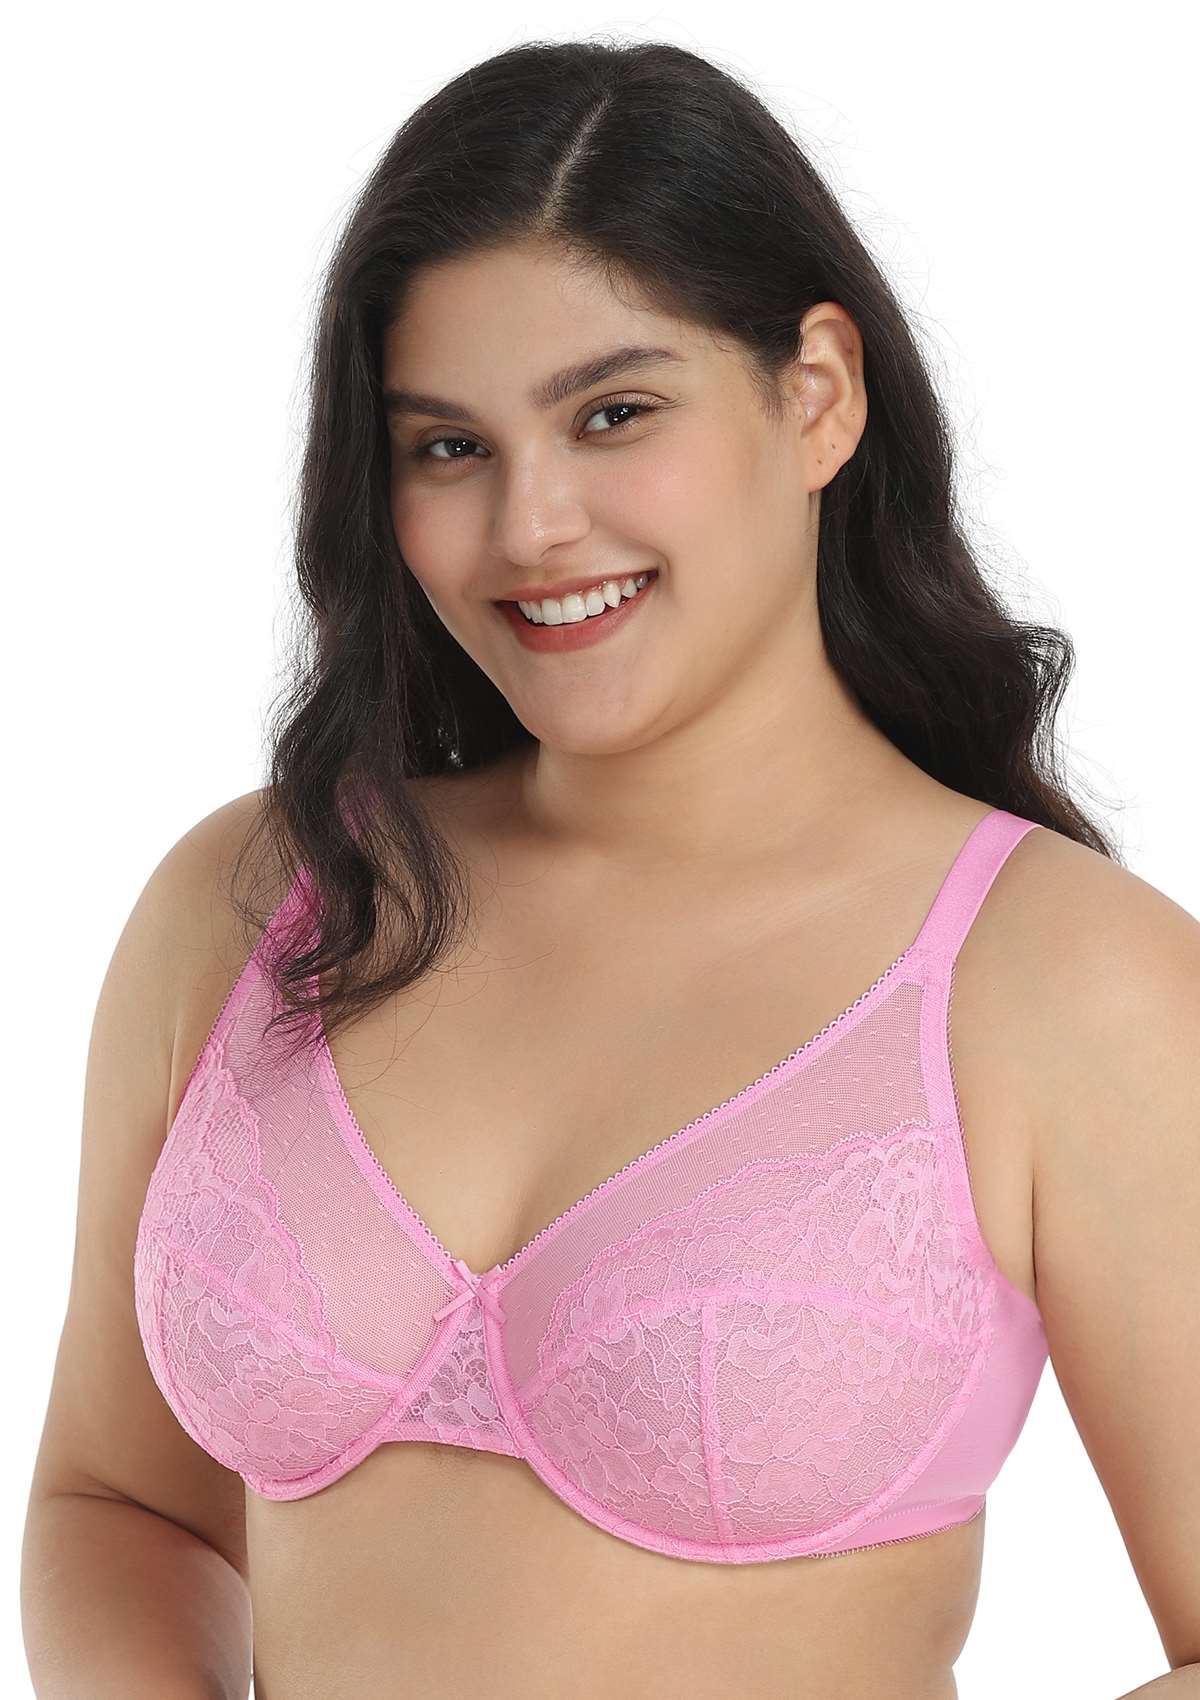 HSIA Enchante Lacy Bra: Comfy Sheer Lace Bra With Lift - Pink / 34 / G